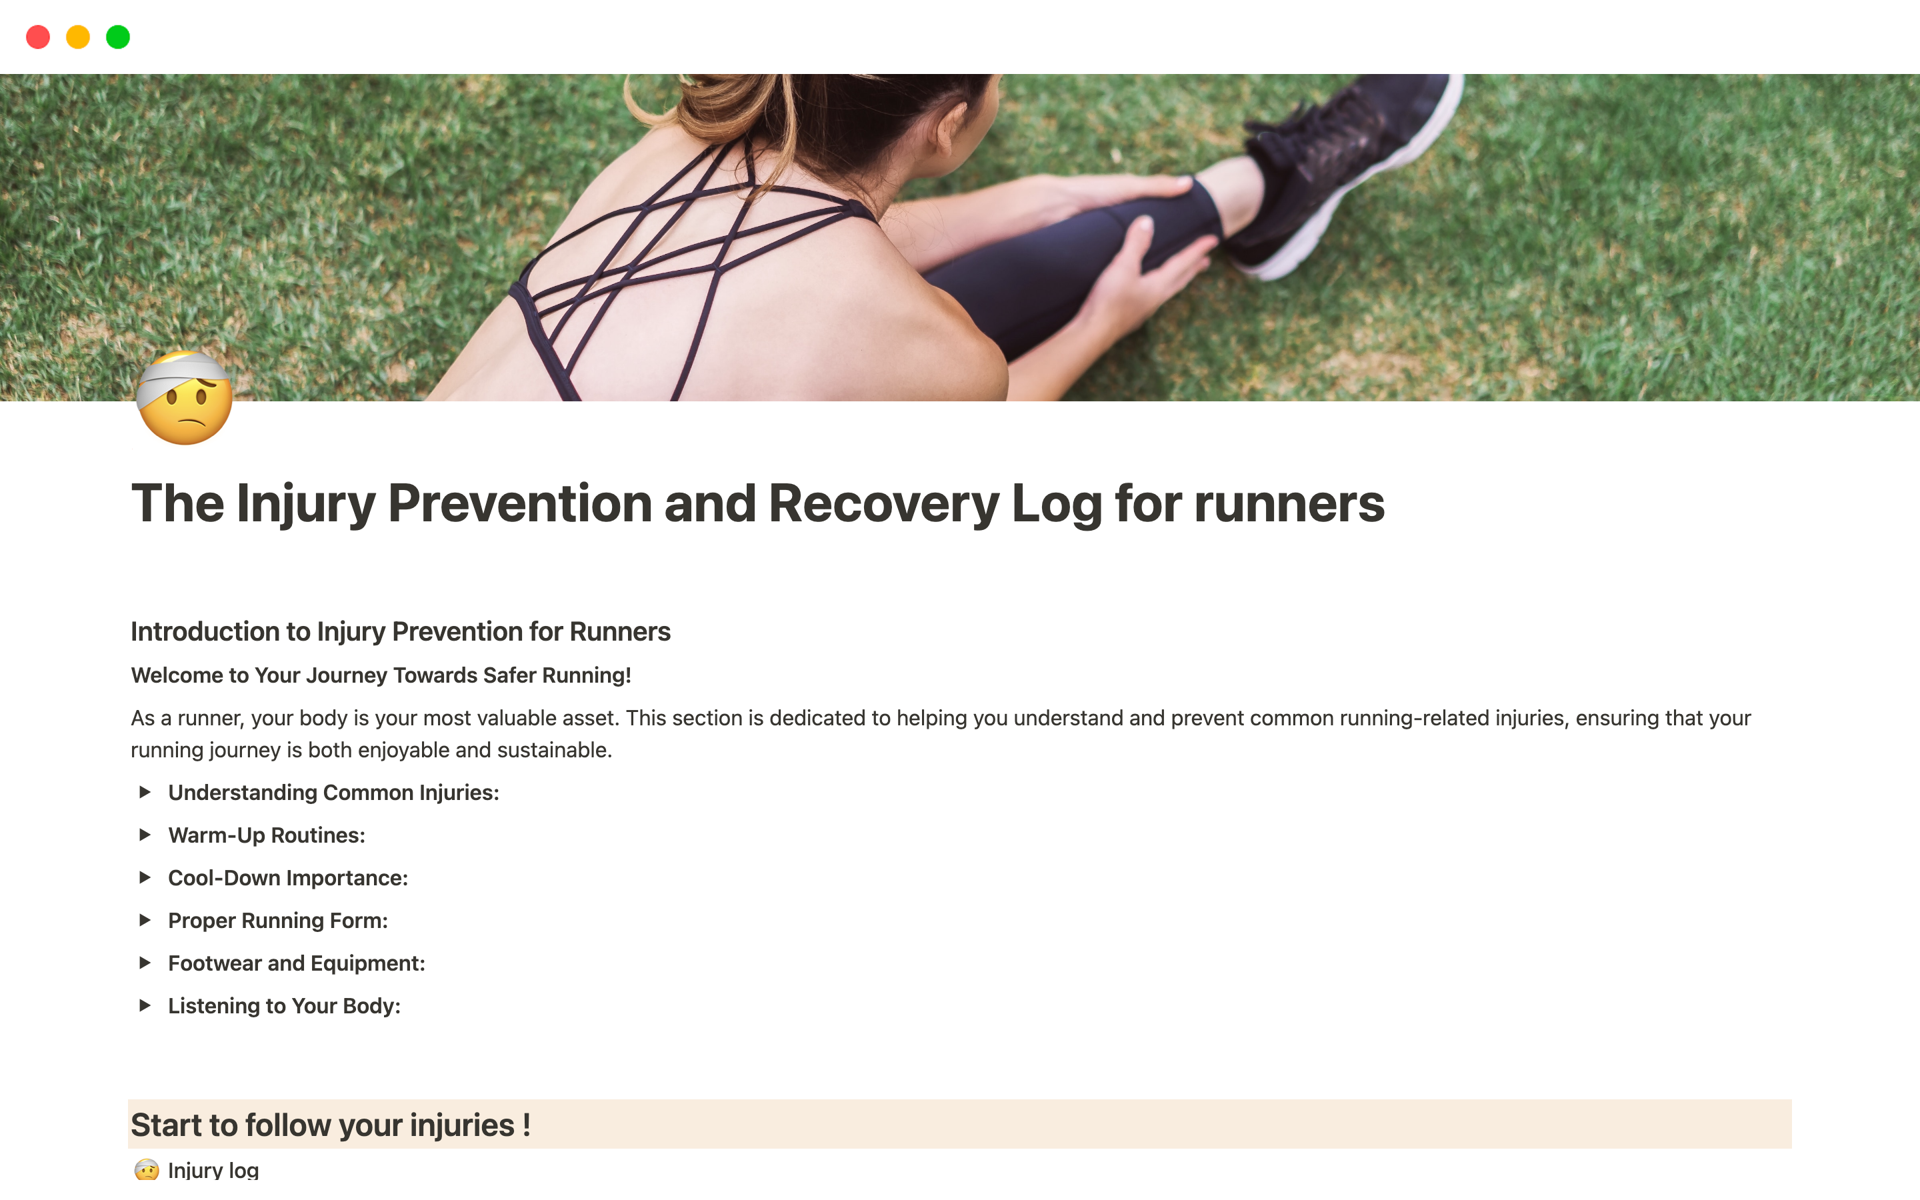 The Injury Prevention and Recovery Log for runnersのテンプレートのプレビュー